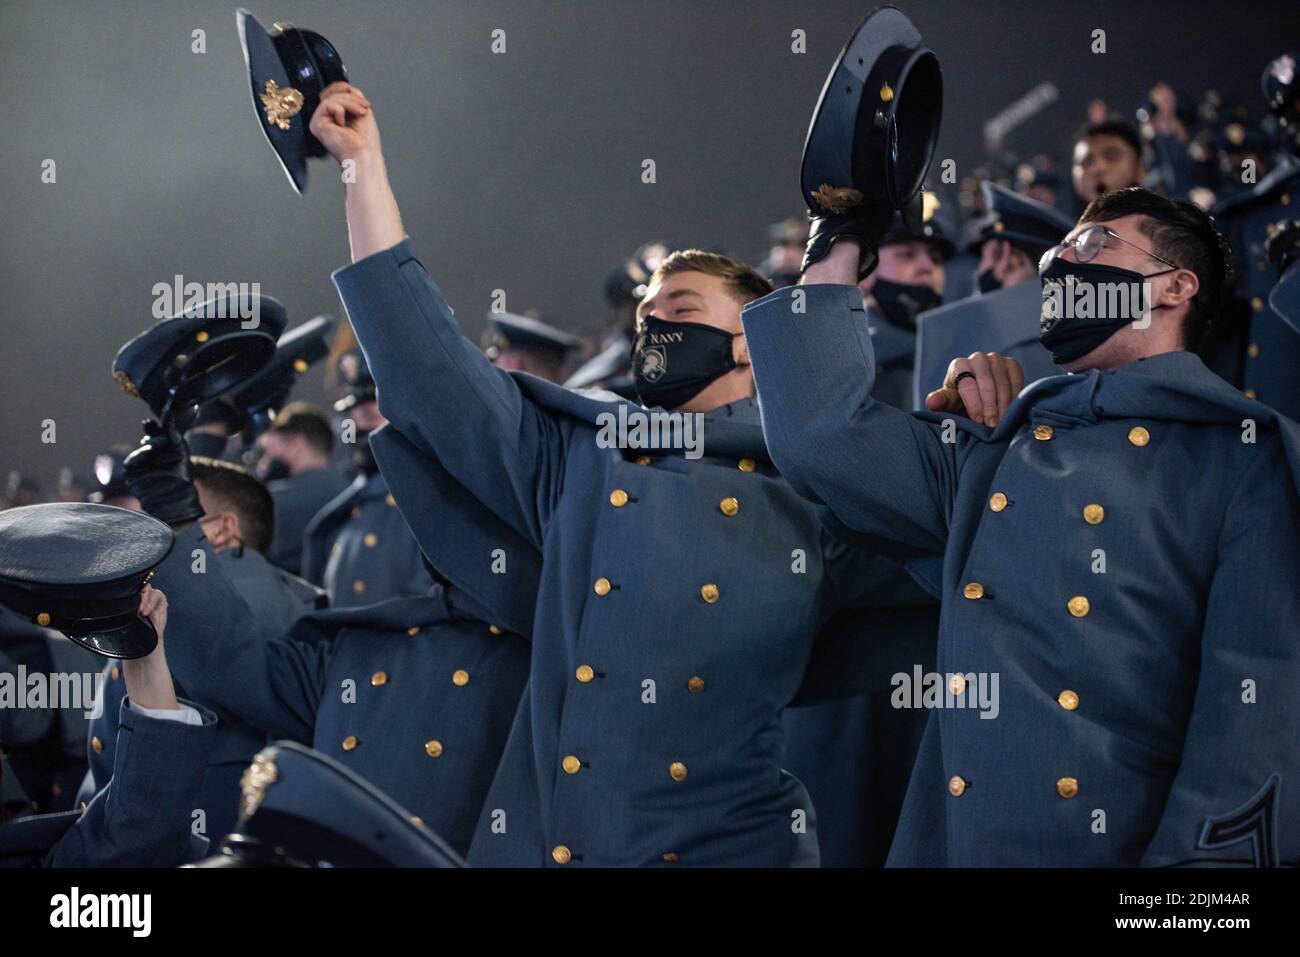 U.S. Navy midshipmen cheer from the stands during the 121st Army-Navy football game at Michie Stadium December 12, 2019 in West Point, New York. The Army Black Knights shutout the Navy Midshipmen 15-0. Stock Photo